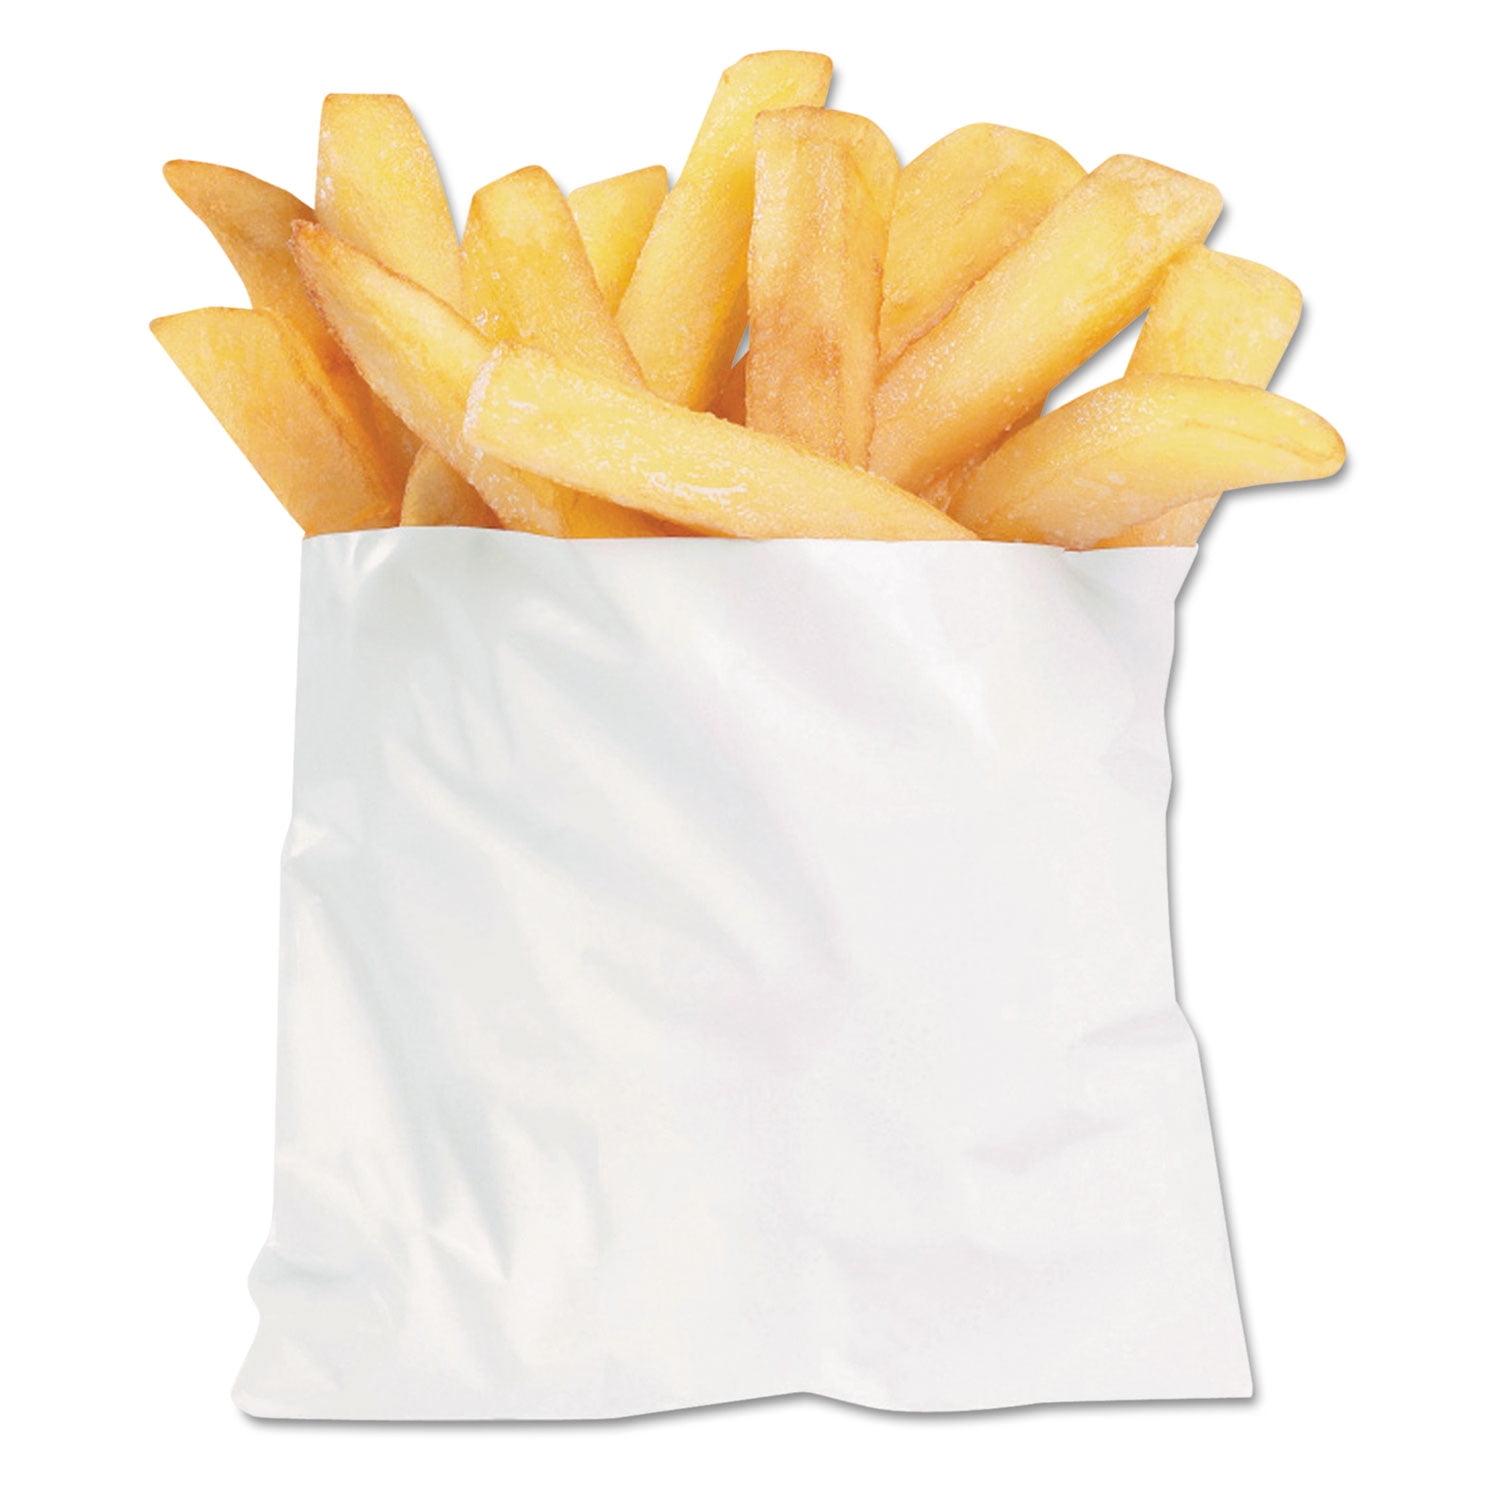 Big Kraft French Fries Box - Recyclable